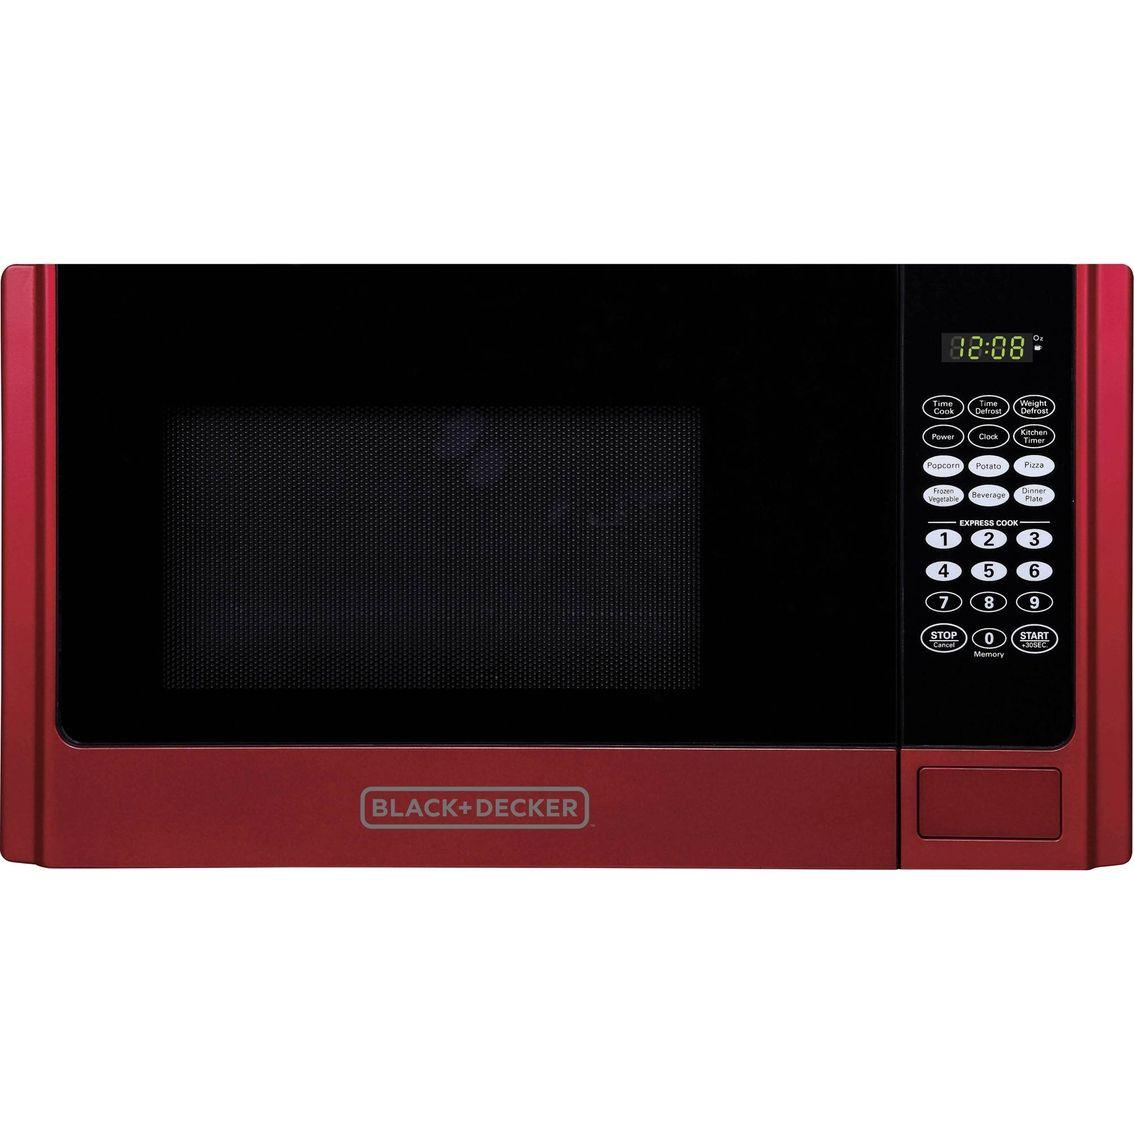 Red and Black Appliance Logo - Black & Decker 0.9 Cu. Ft. Microwave Oven | Microwave Ovens | Home ...